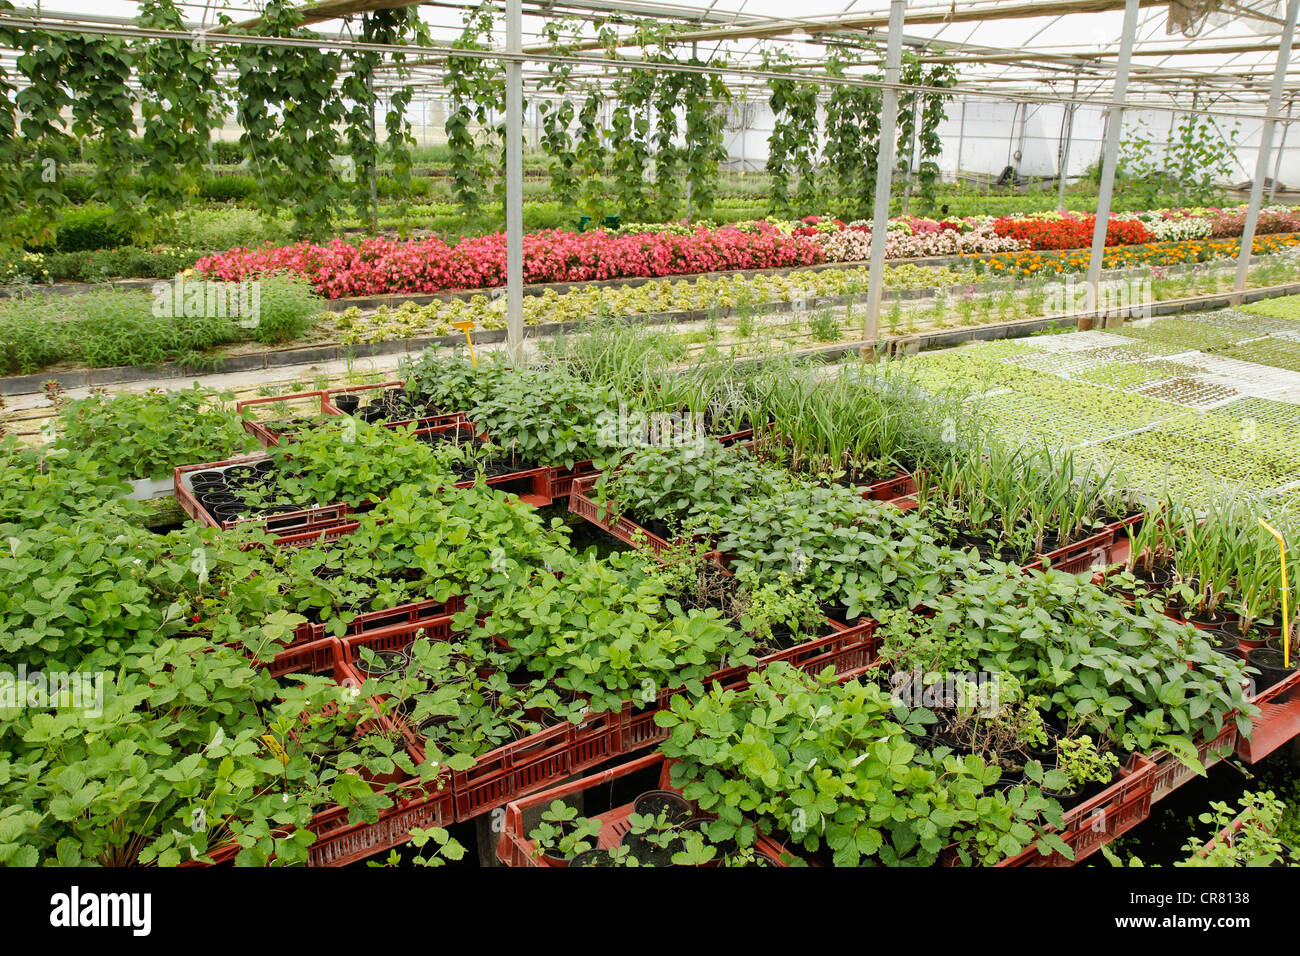 Production of medicinal plants in a greenhouse, Balaguer, Lleida, Catalonia, Spain Stock Photo